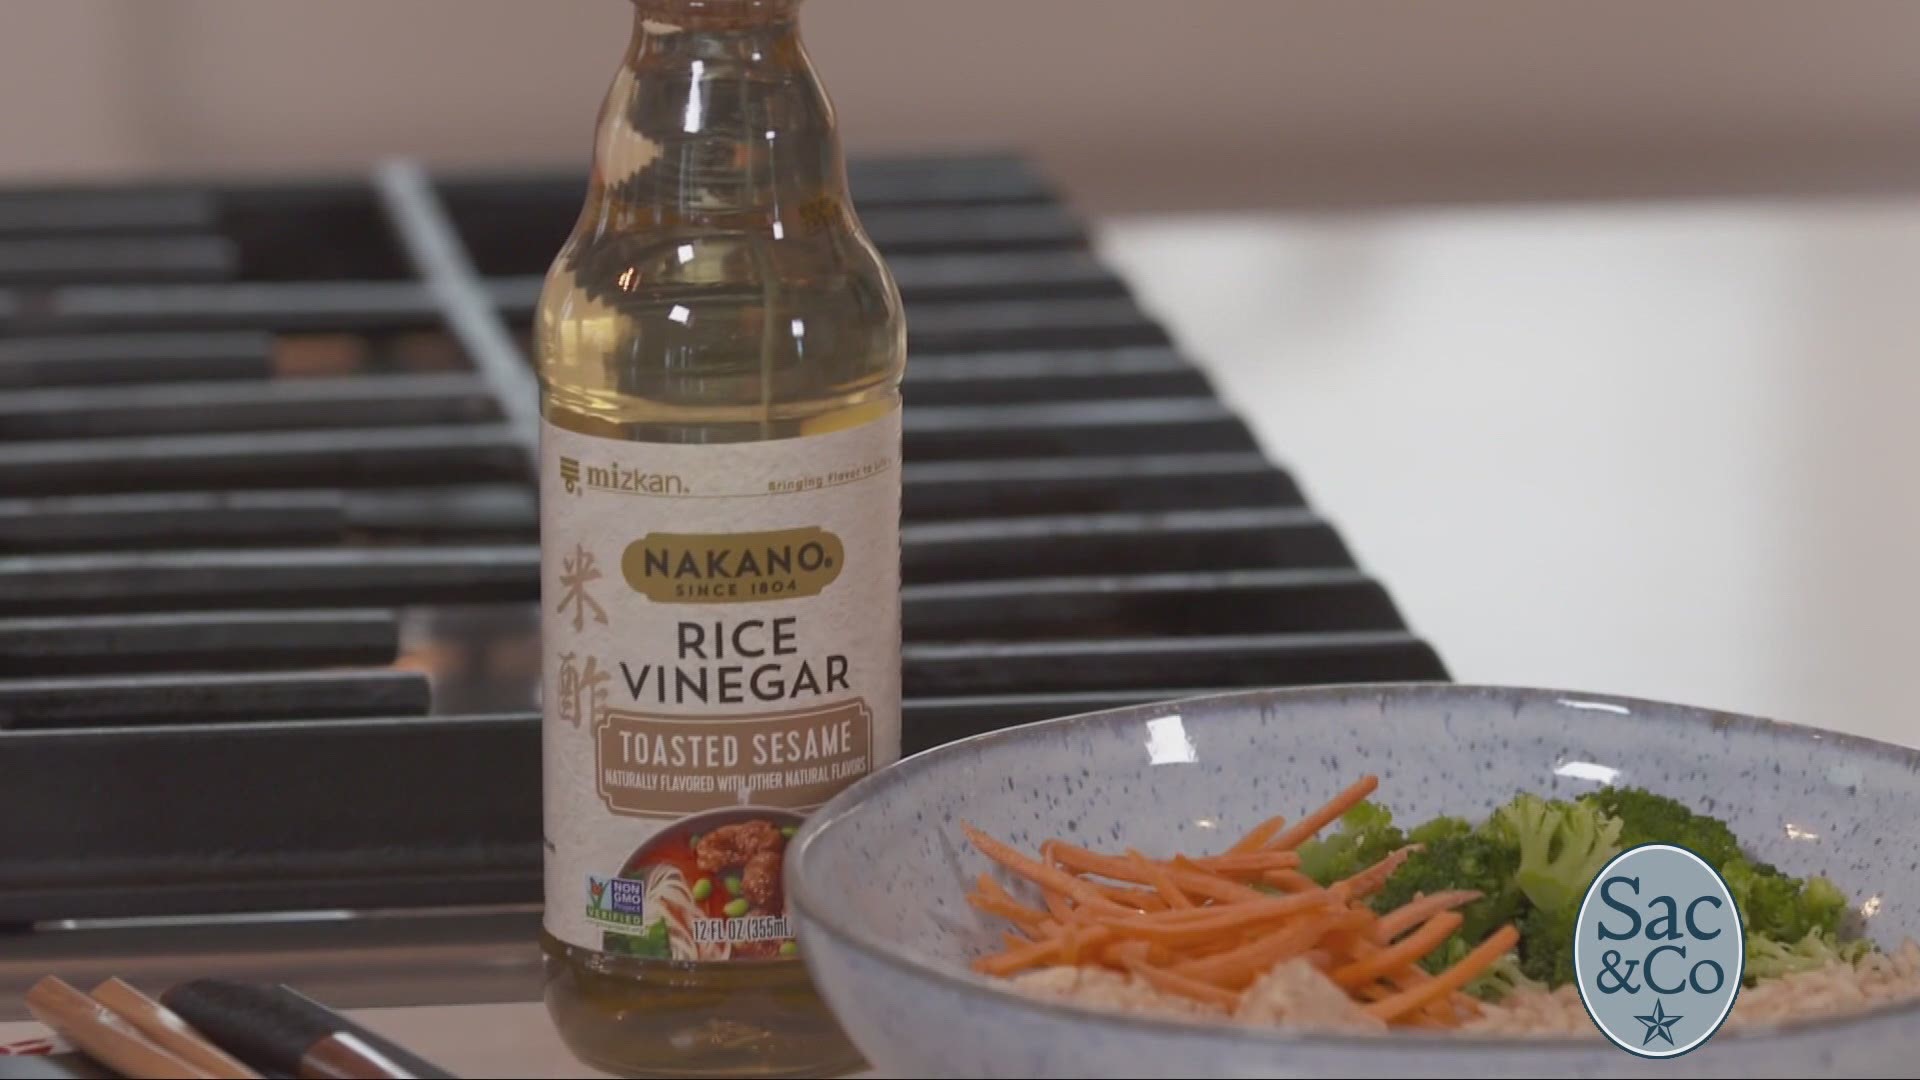 Registered Dietician Mia Syn is here with us to show how even the most inexperienced cook can whip up enjoyable and healthy meals with the help of Rice Vinegar. The following is a paid segment sponsored by Nakano Flavors.